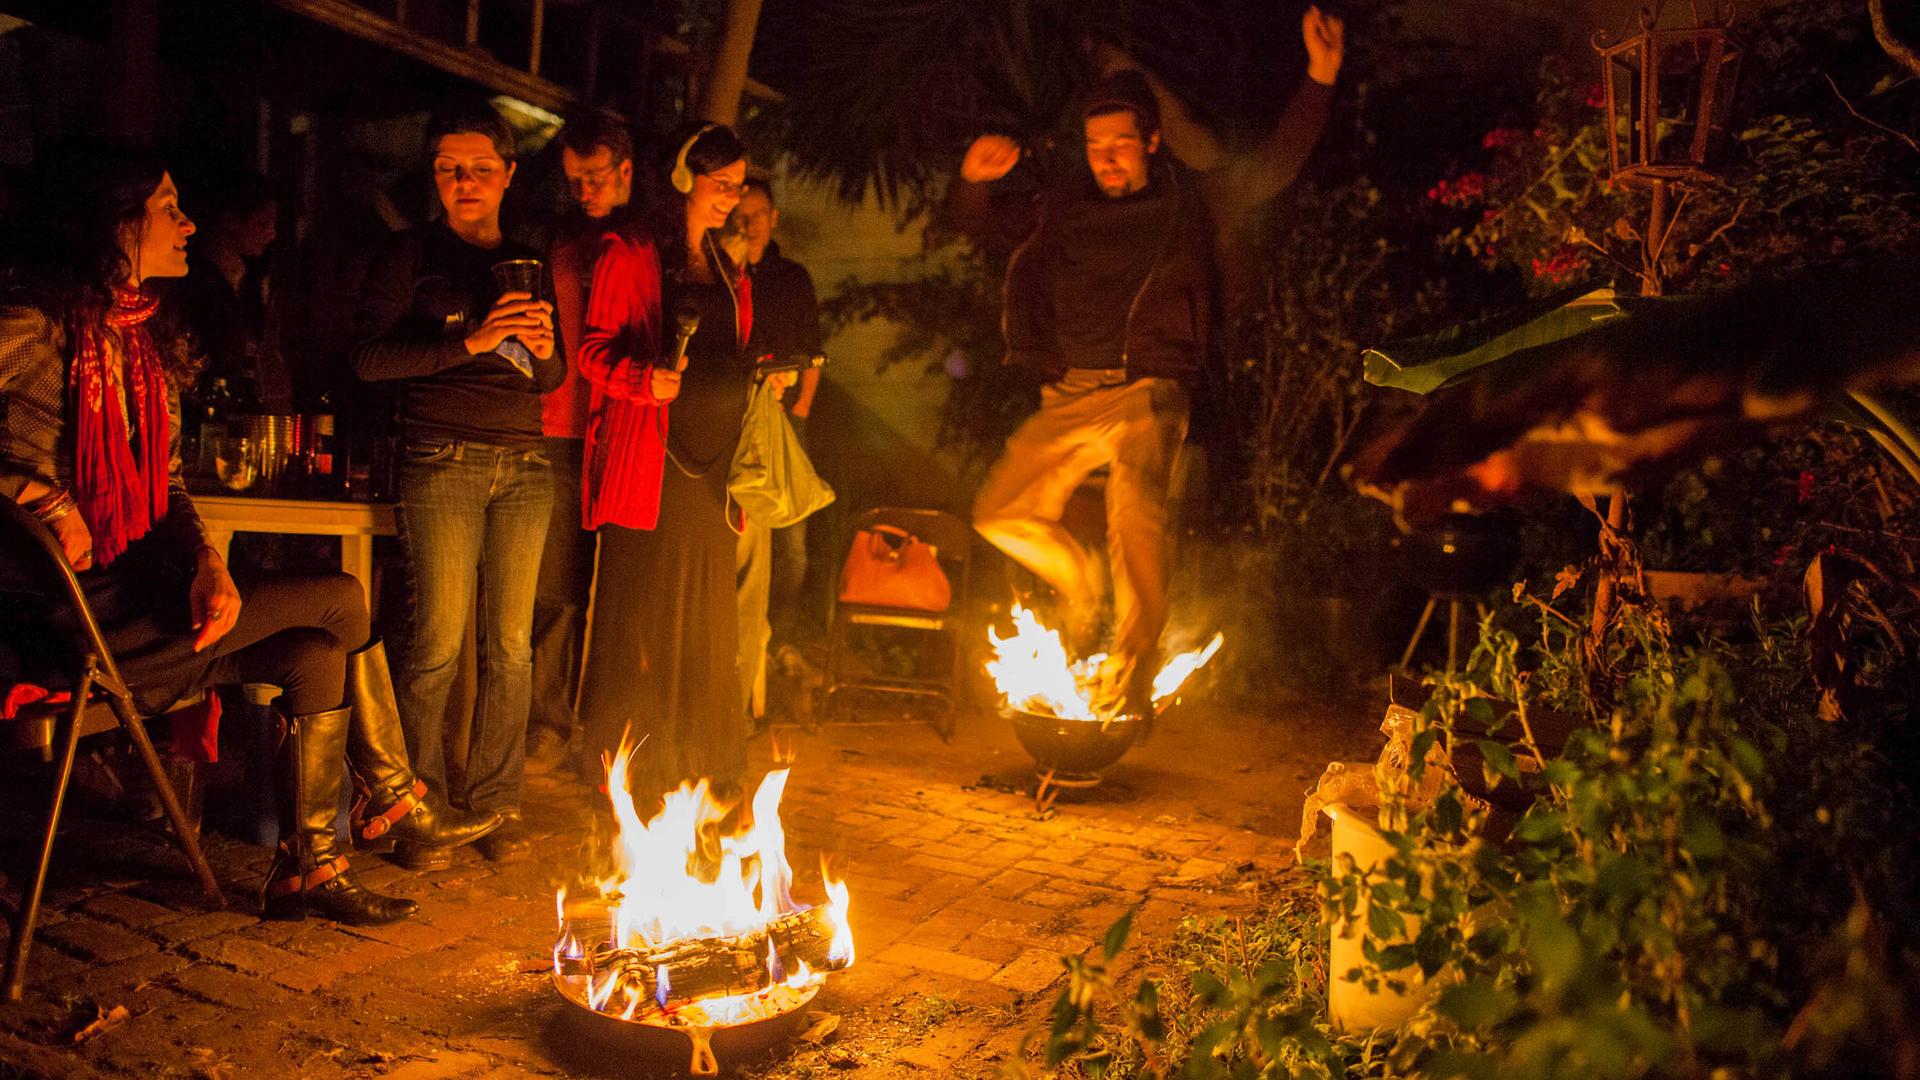 The reporter, Shuka Kalantari, records the sounds of a Persian New Year's celebration at her friend's home. Jumping over a small fire is a symbolic gesture to start a fresh new year.